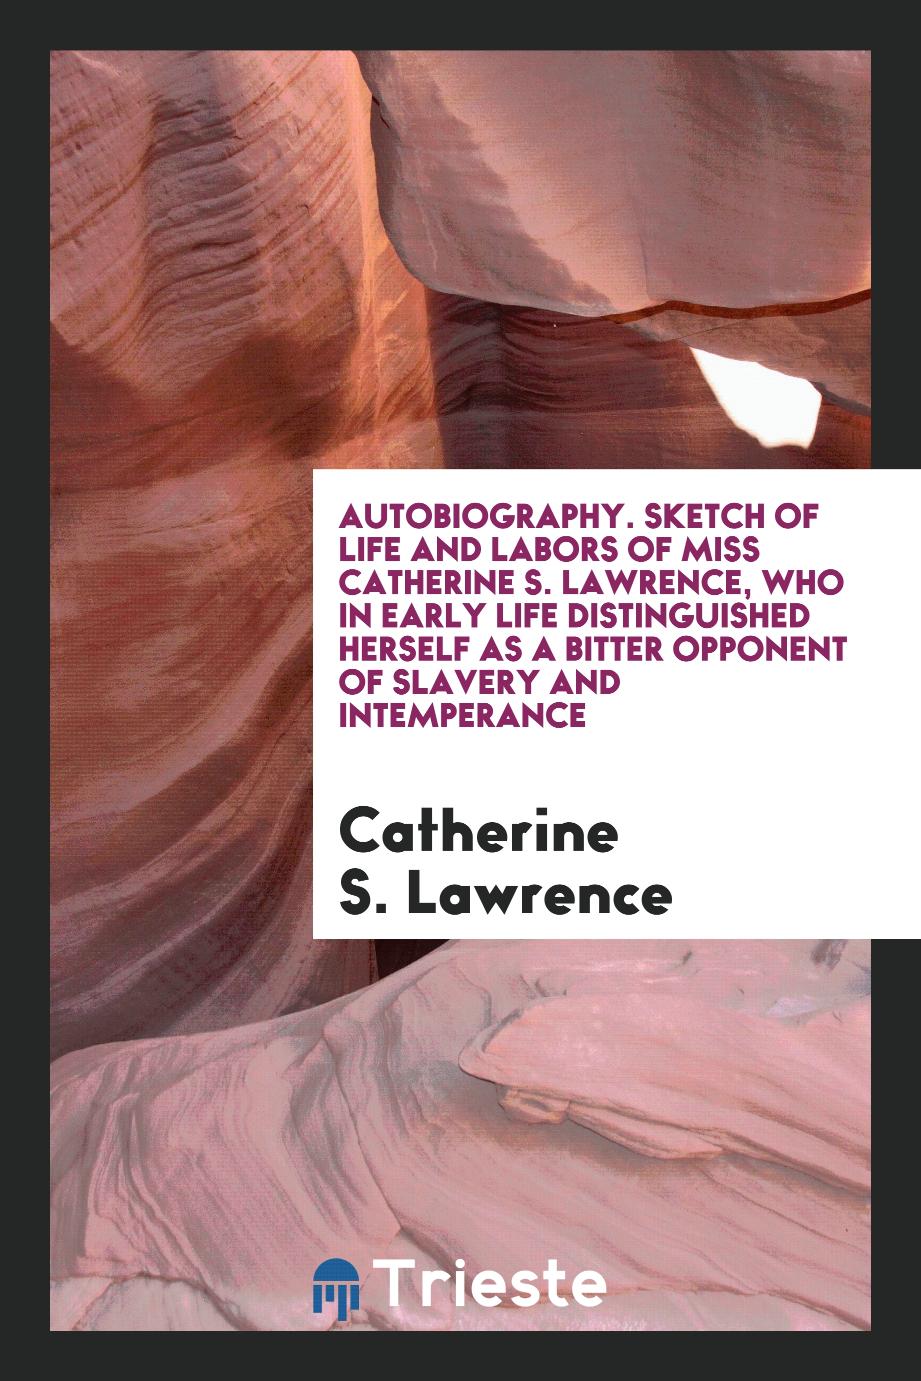 Autobiography. Sketch of Life and Labors of Miss Catherine S. Lawrence, Who in Early Life Distinguished Herself as a Bitter Opponent of Slavery and Intemperance